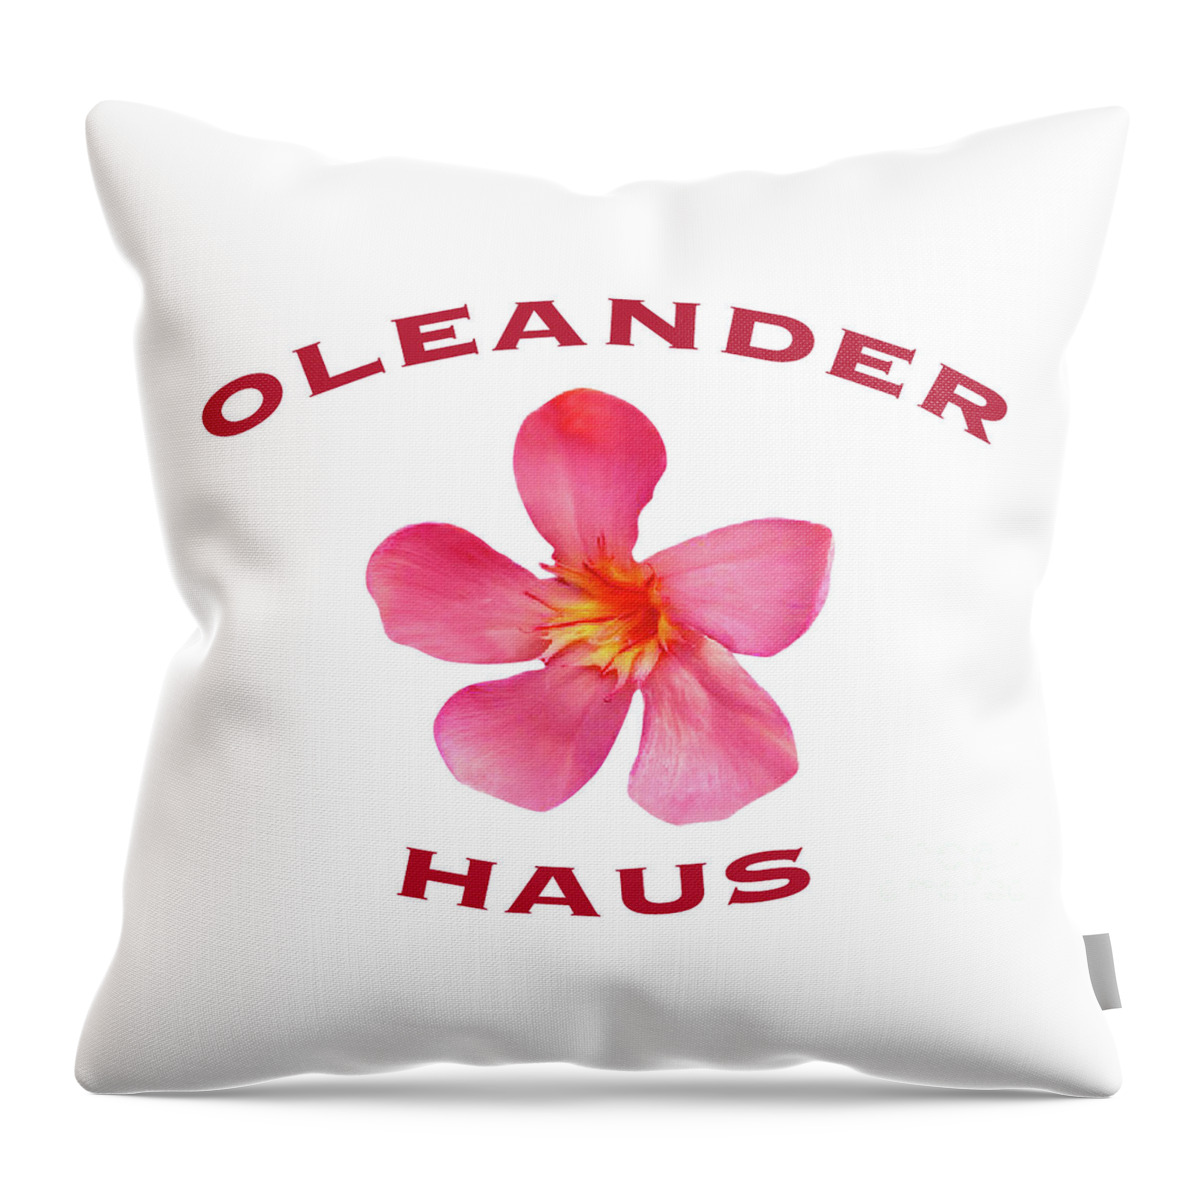 Oleander Throw Pillow featuring the photograph Oleander Haus by Wilhelm Hufnagl